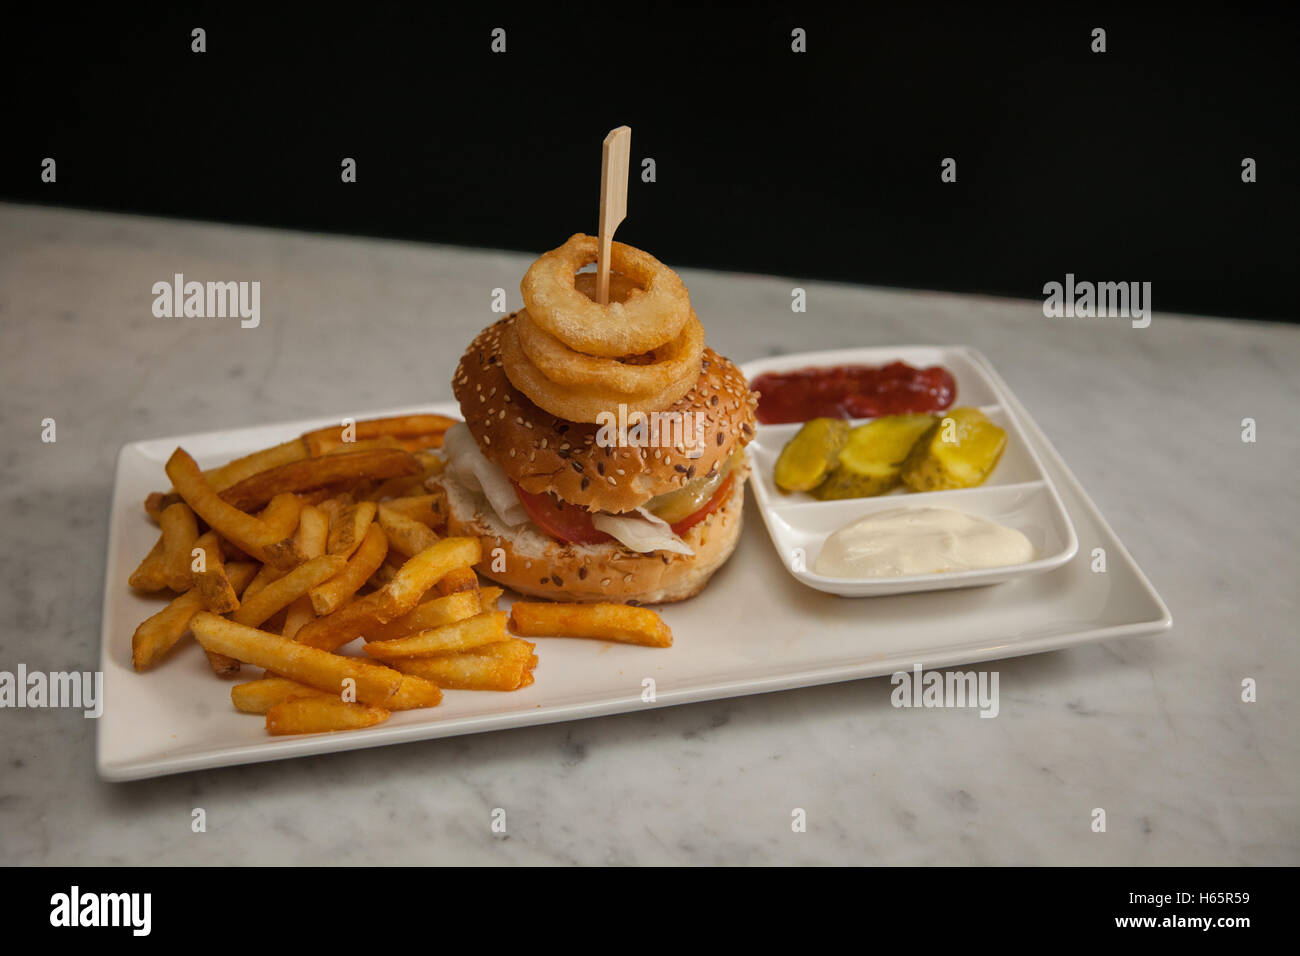 A cheeseburger, french fries, onion rings, ketchup, mayonnaise on an oblong white plate Stock Photo